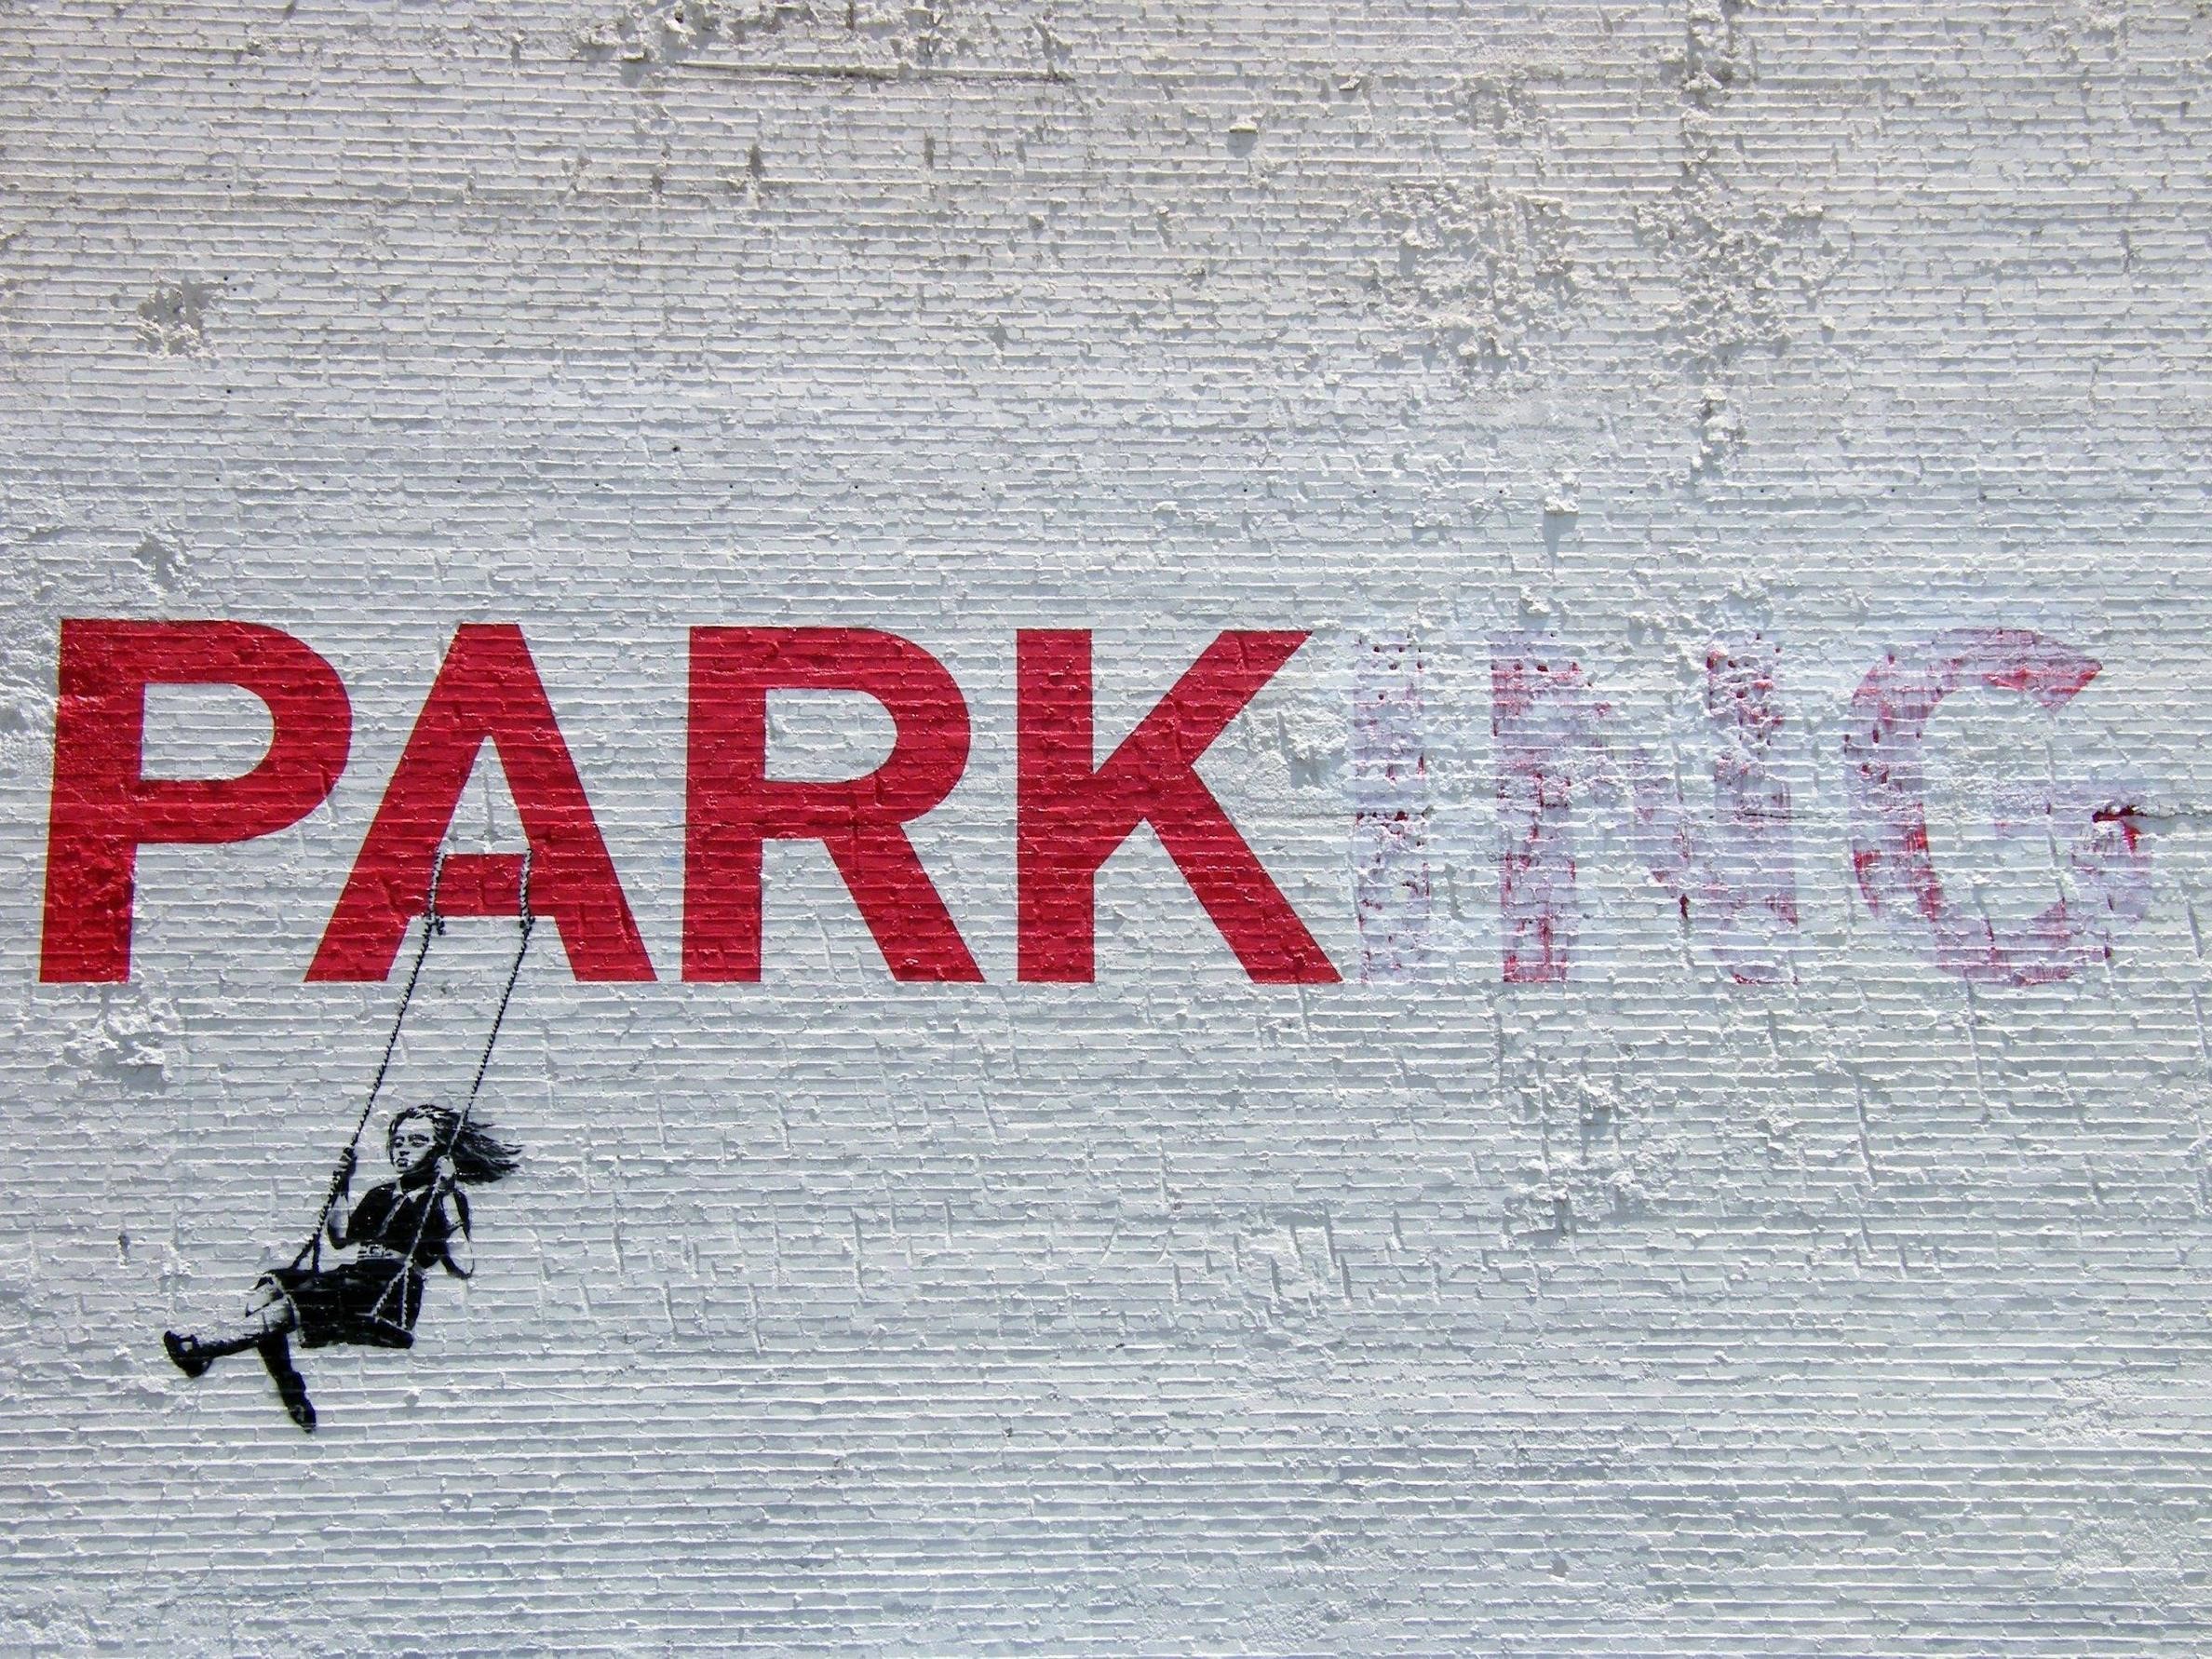 2376x1782 Graffiti, the park, the artist Banksy wallpapers and images .